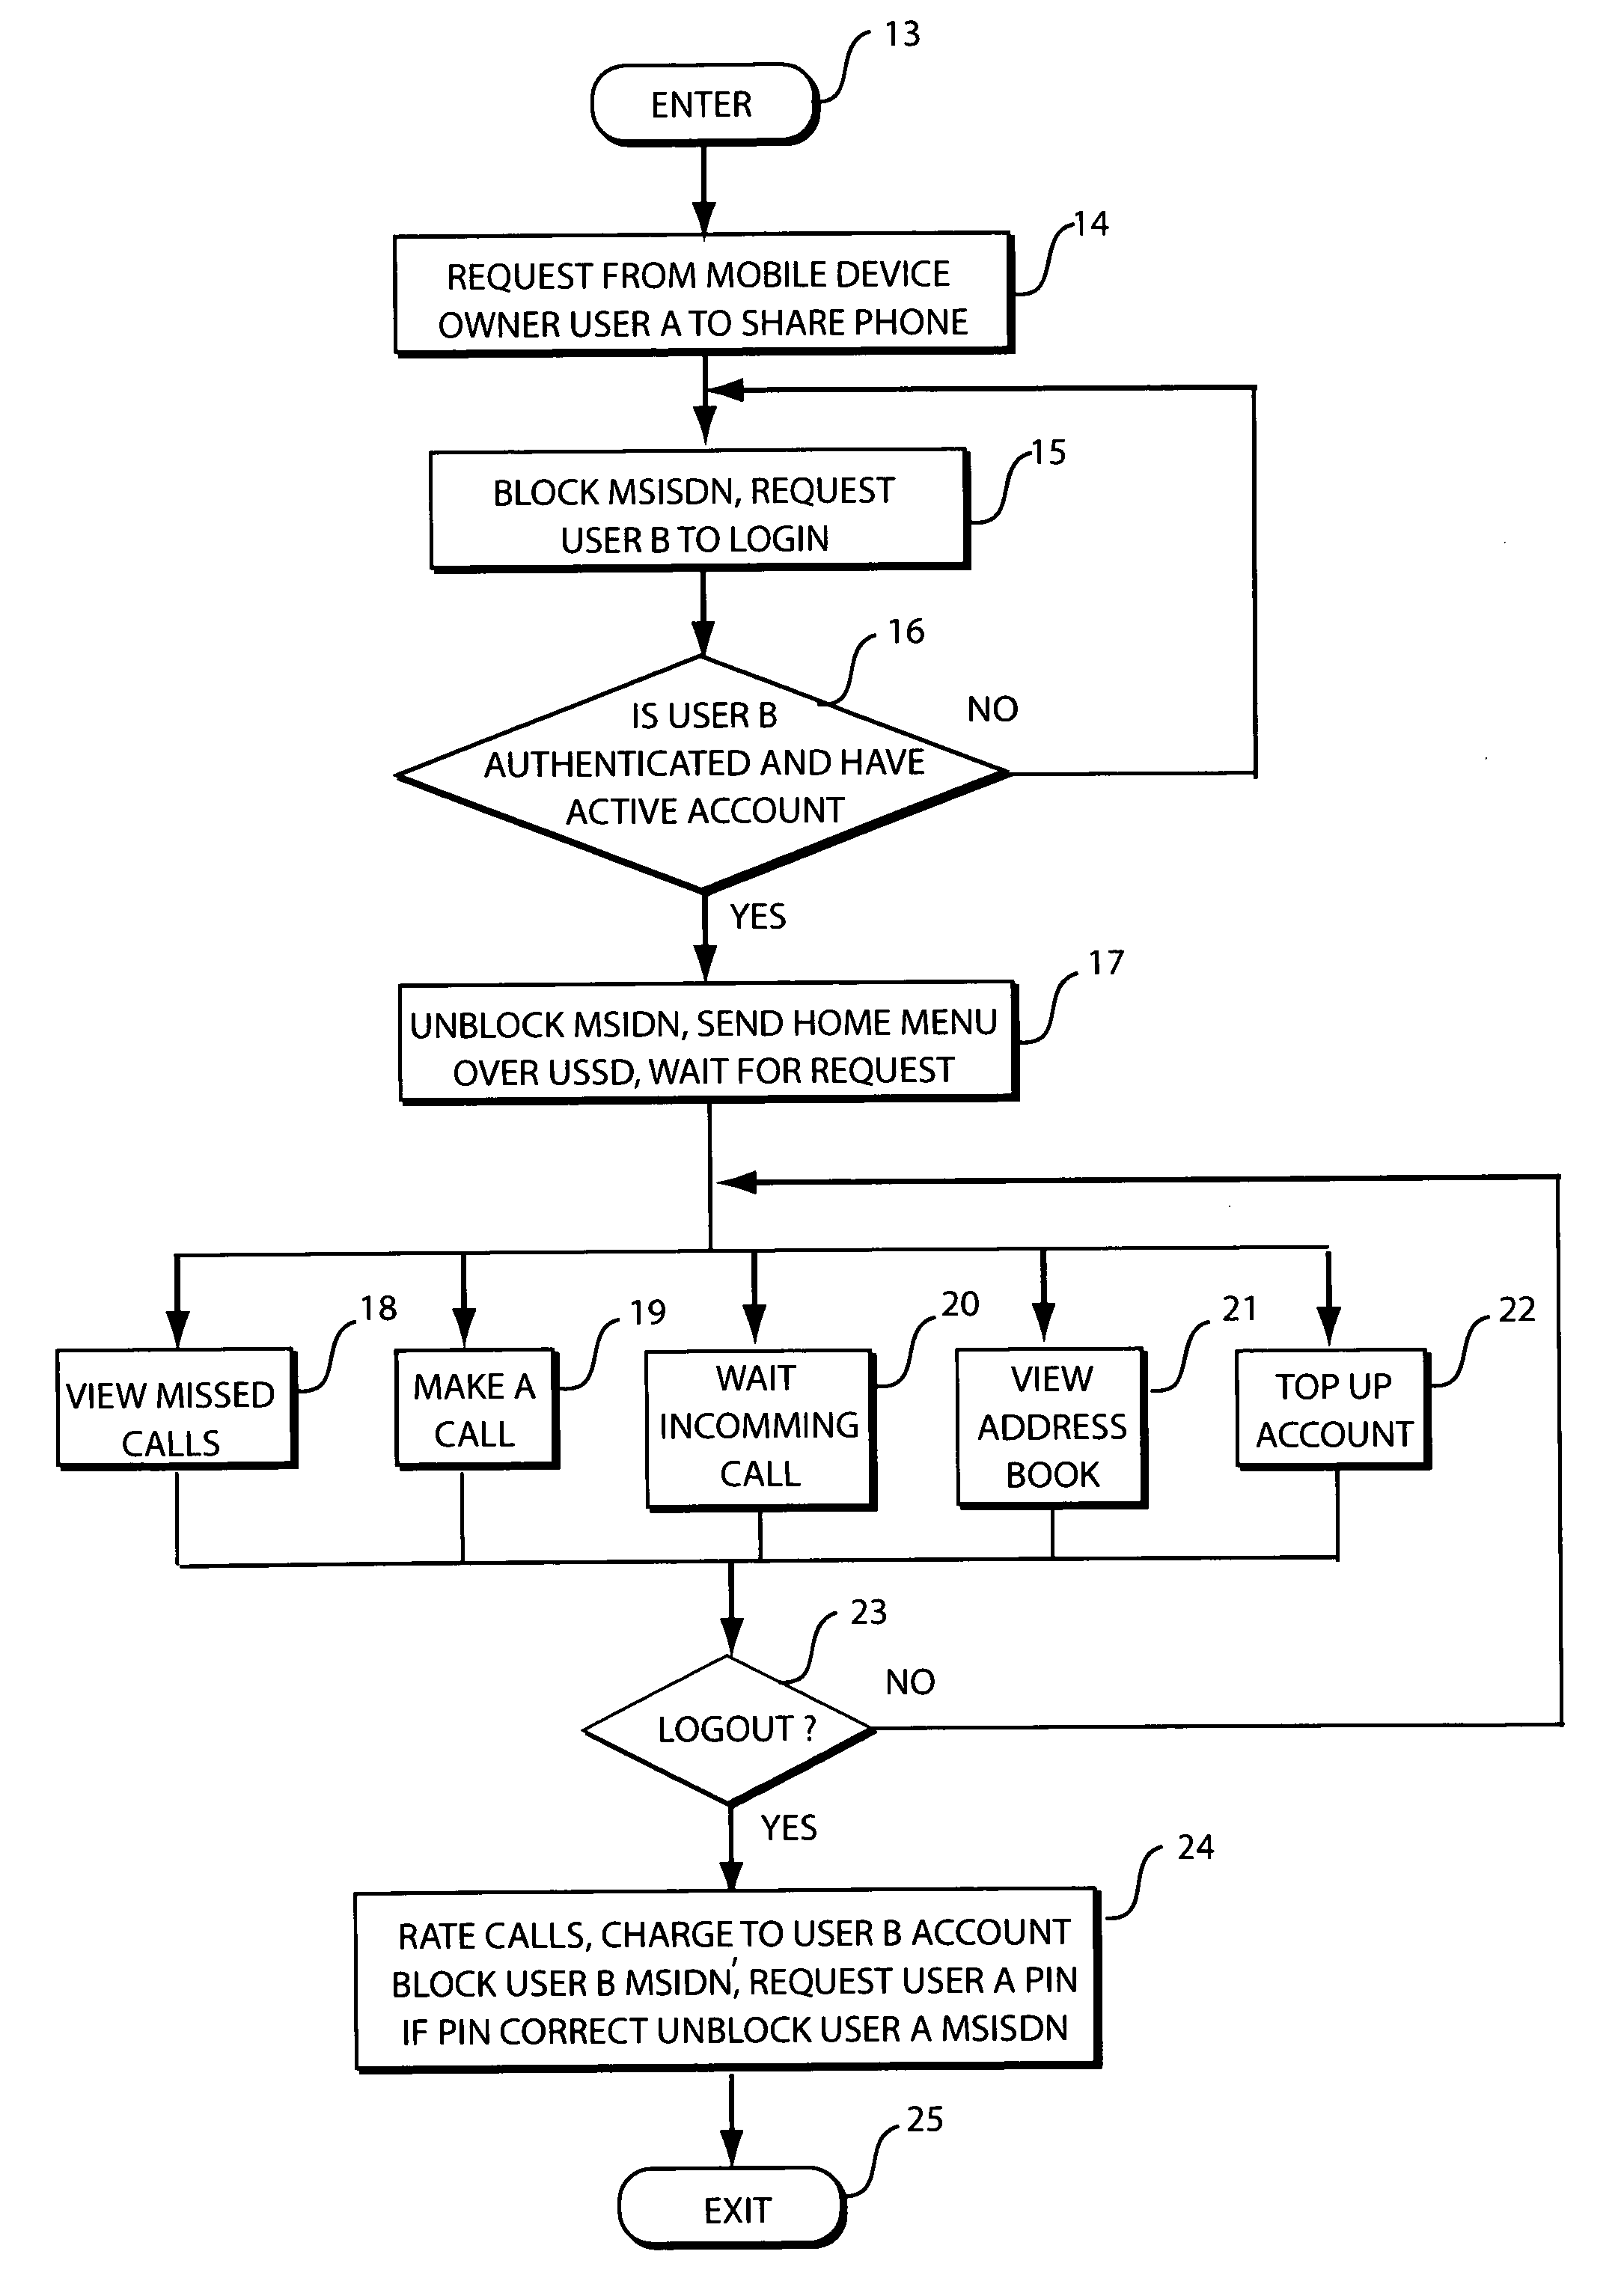 Method and system for enabling personalized shared mobile phone usage